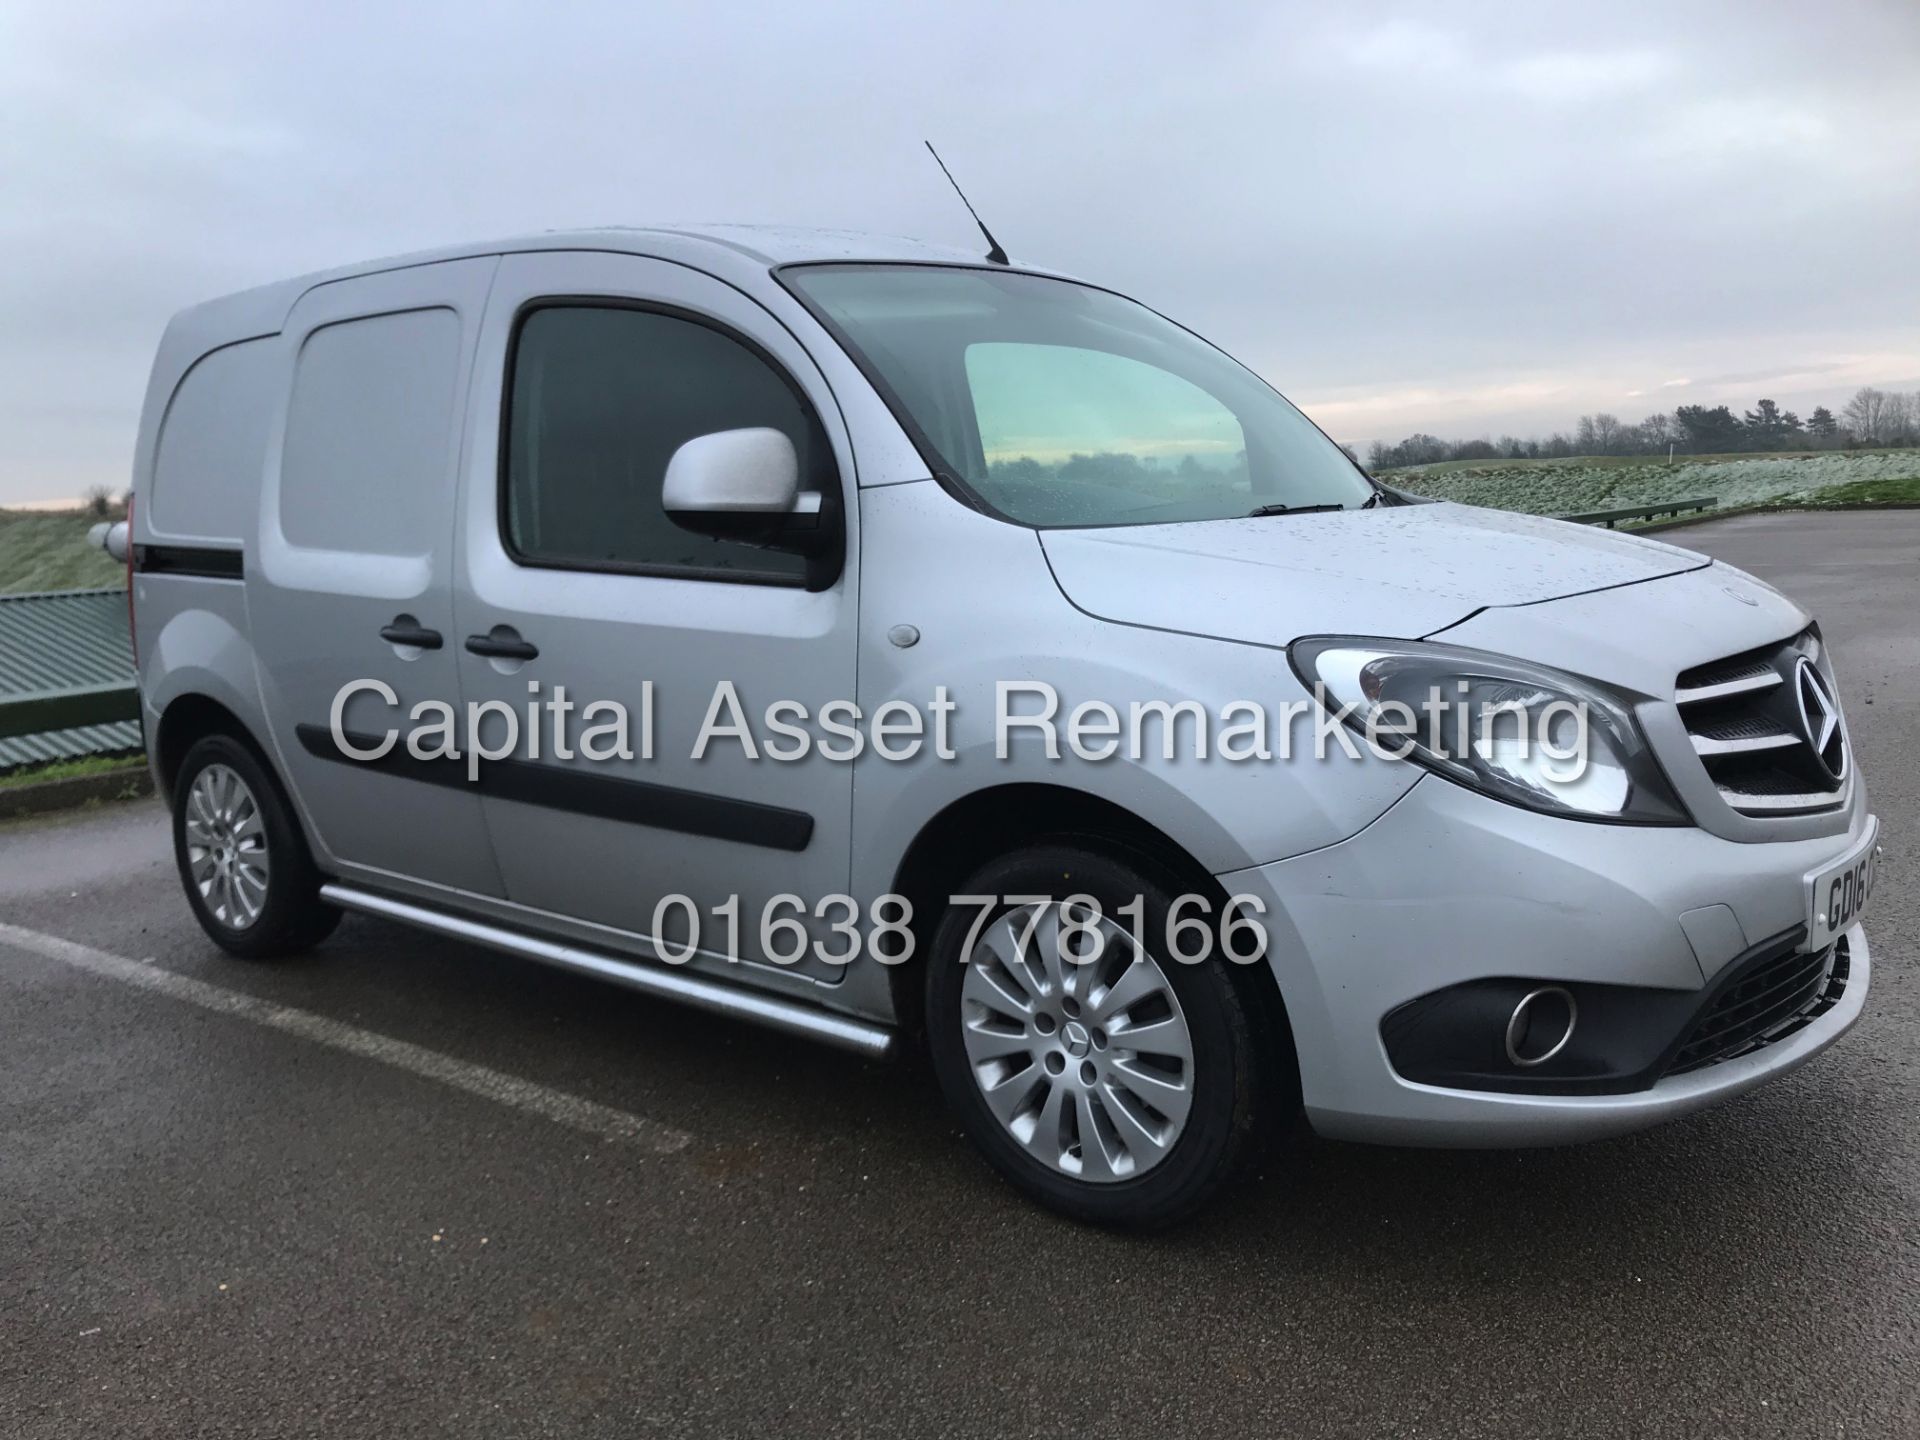 MERCEDES CITAN 111CDI "SPORT" LWB (16 REG) 1 OWNER-AIR CON-6 SPEED-FULLY LOADED *VERY HARD TO FIND* - Image 2 of 18